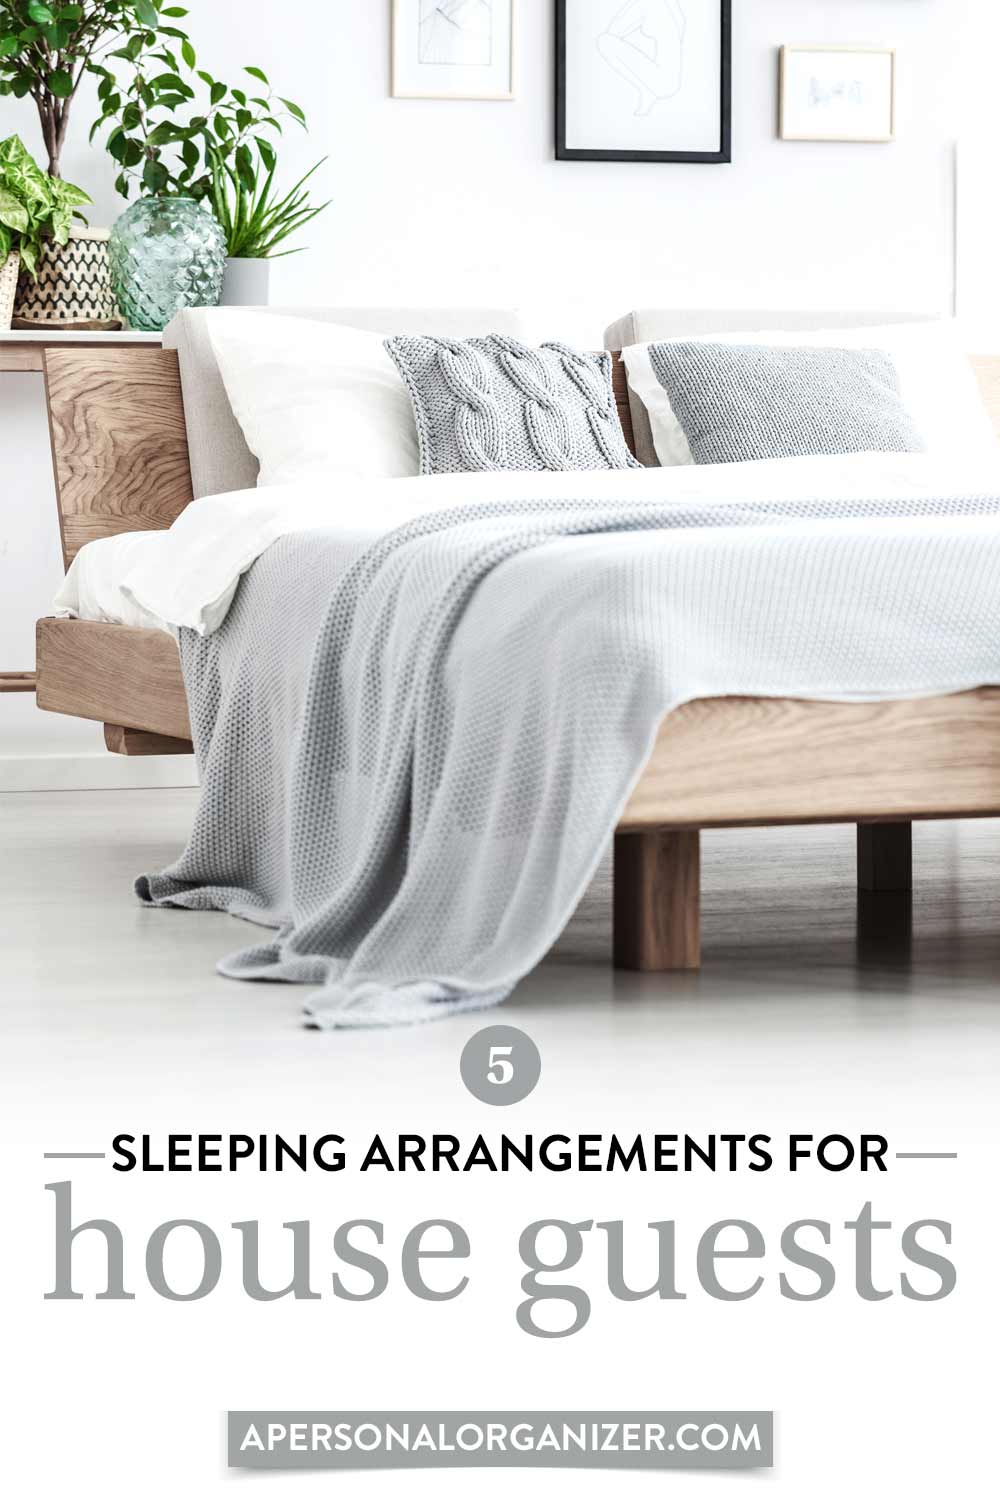 5 Special Sleeping Arrangements For House Guests